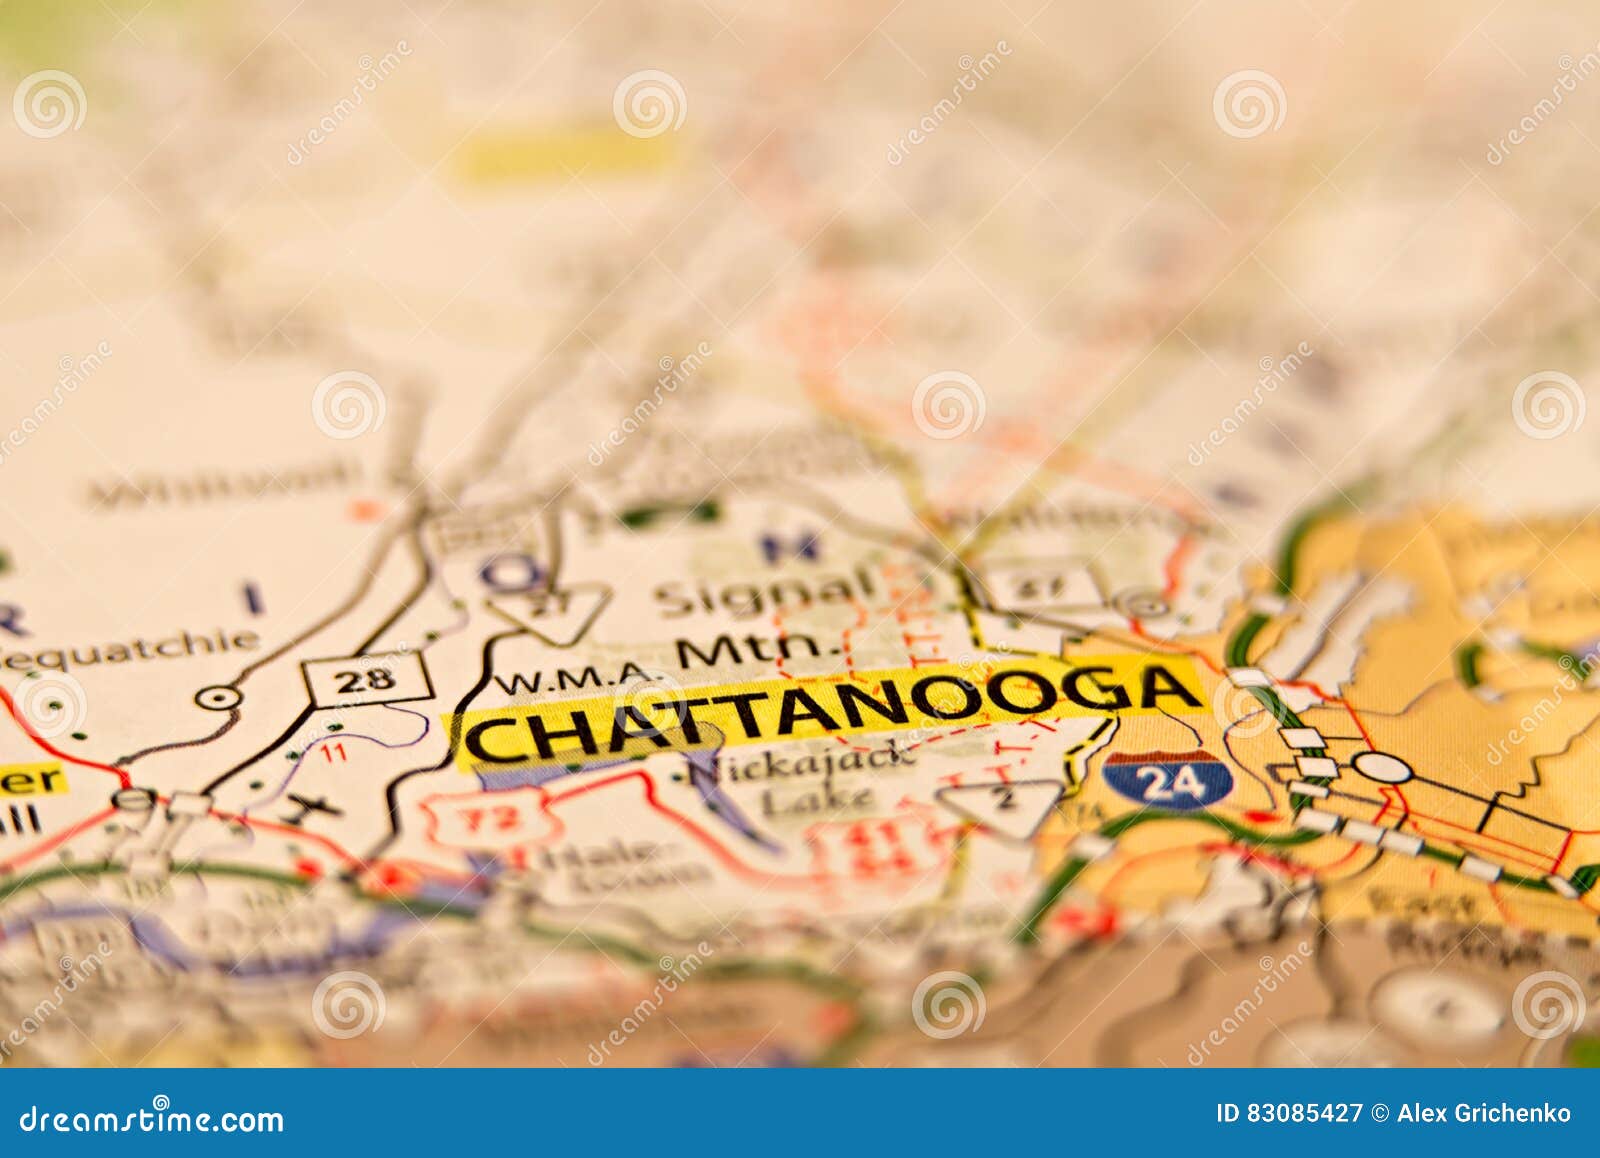 closeup of chattanooga on a geographical map.